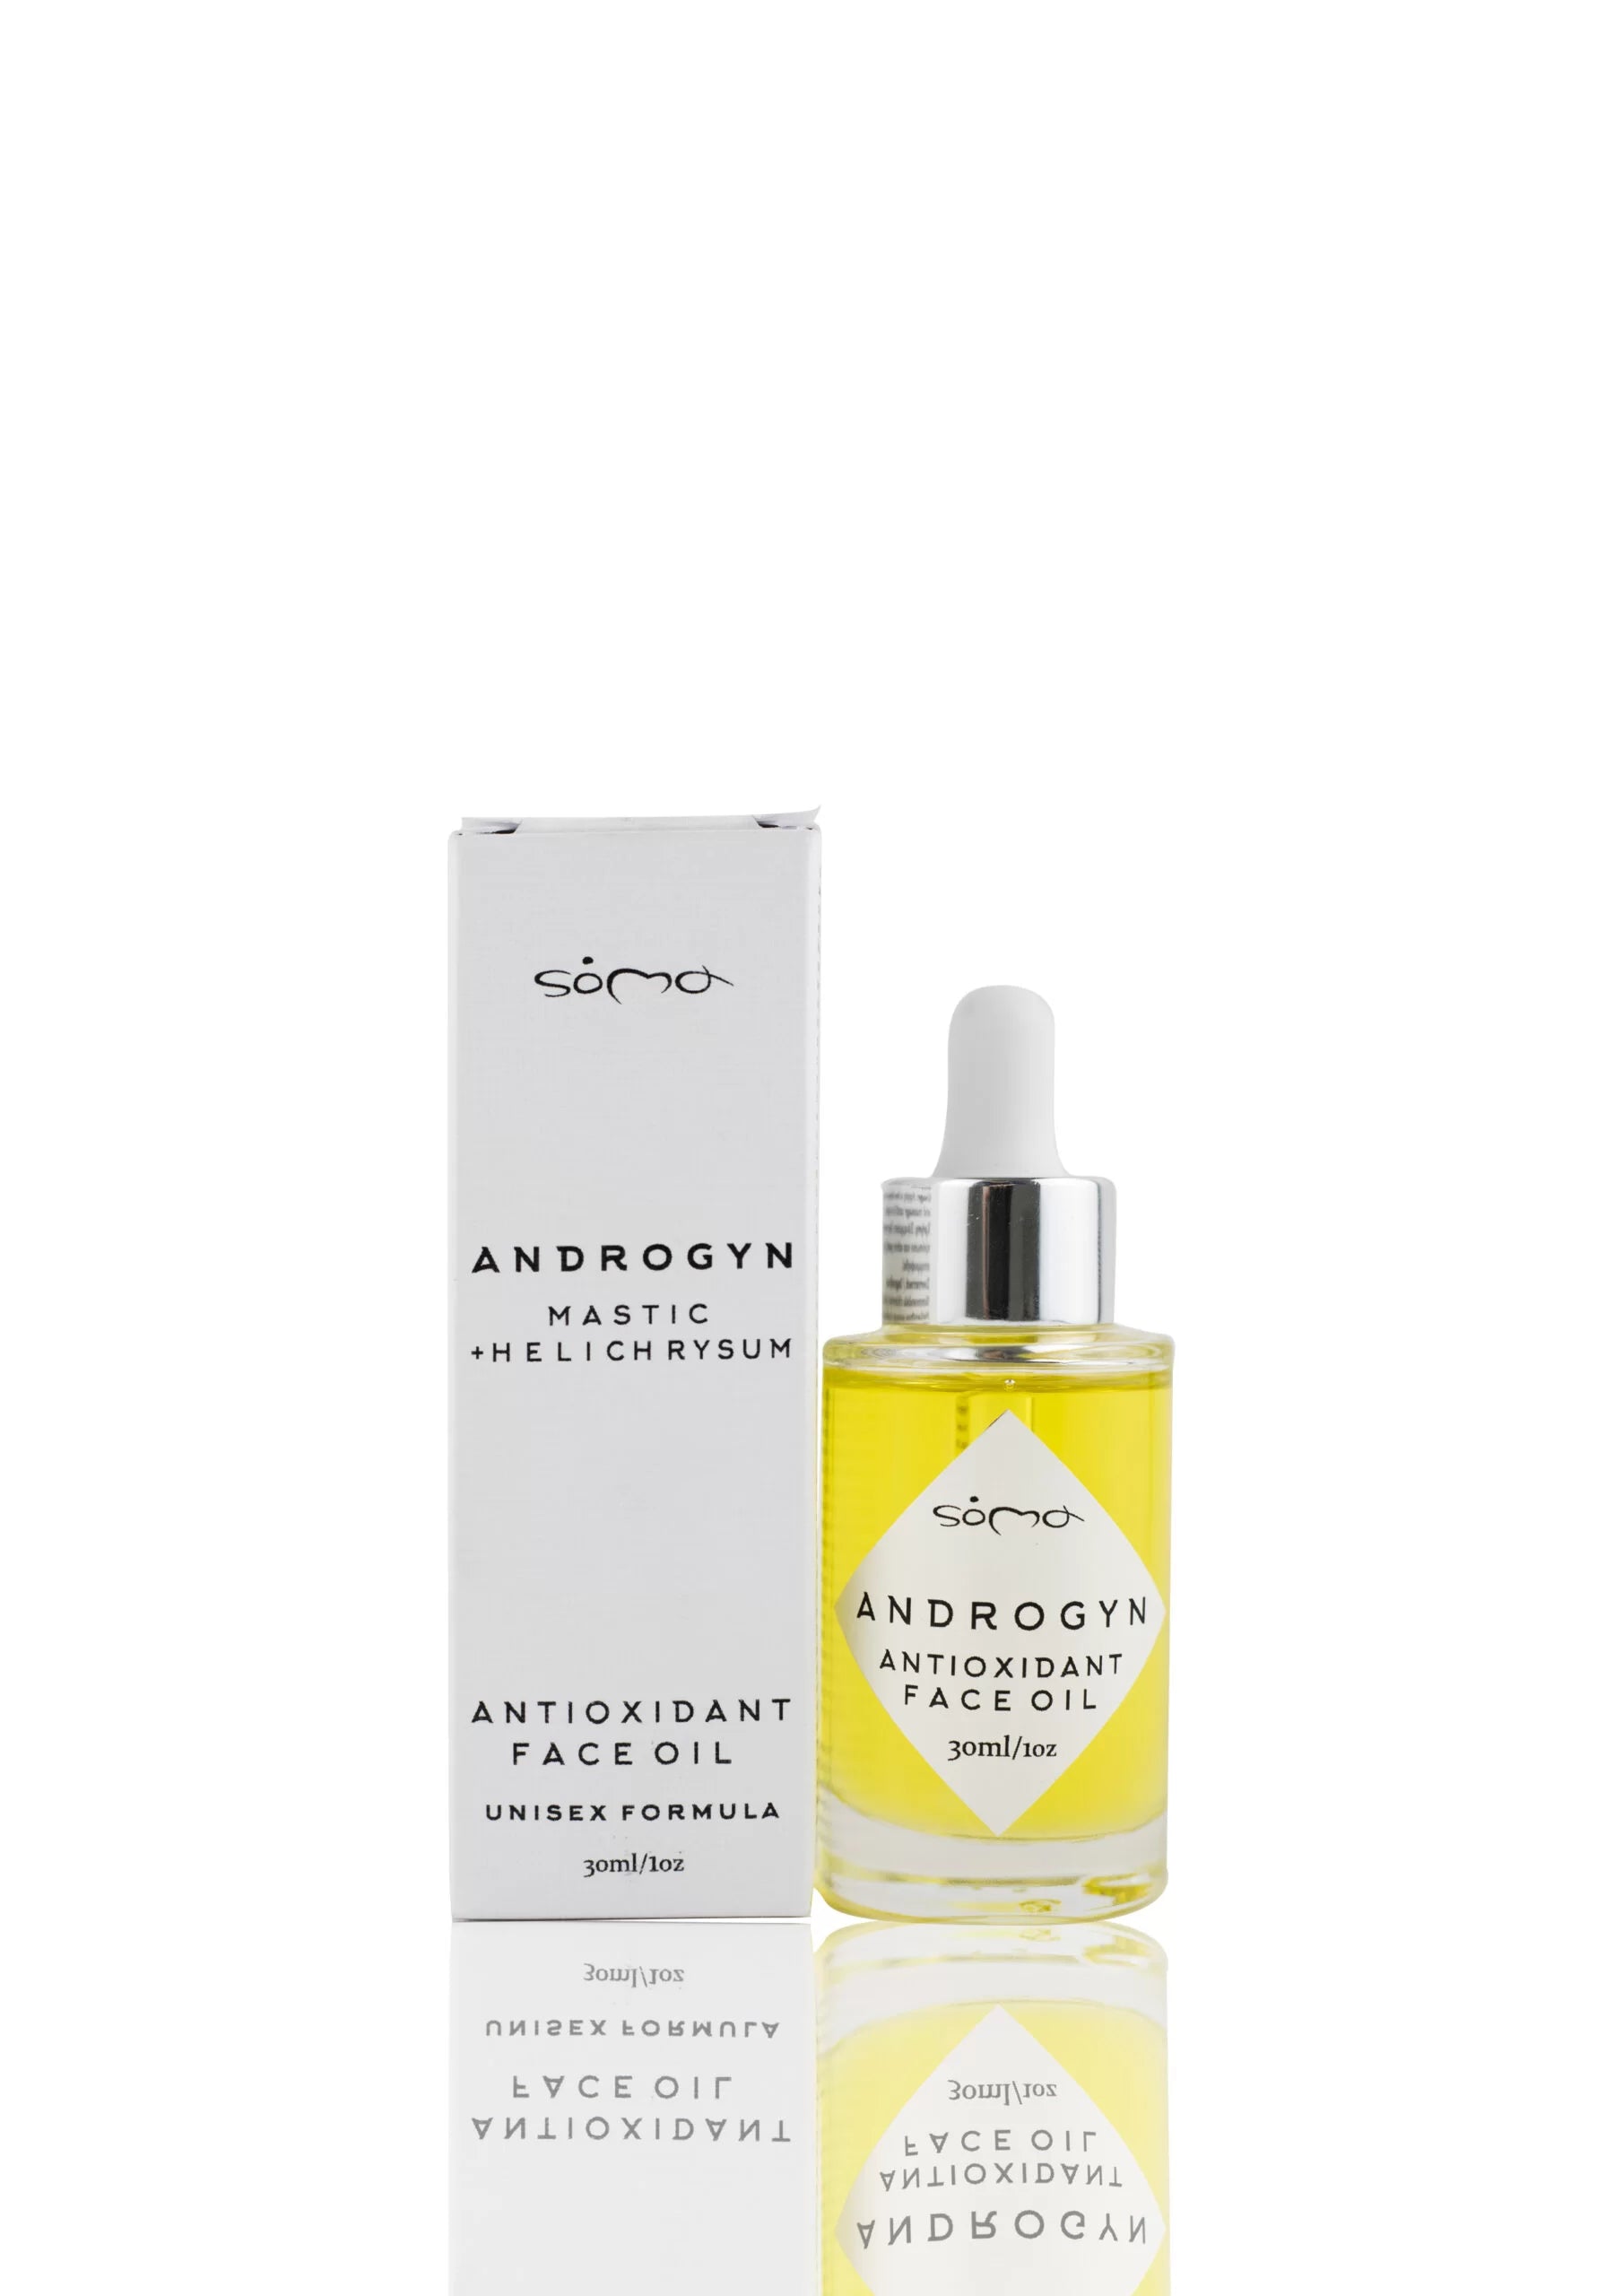 Soma - Androgyn Antioxidant Face Oil with Mastic + Helichrysum 30ml